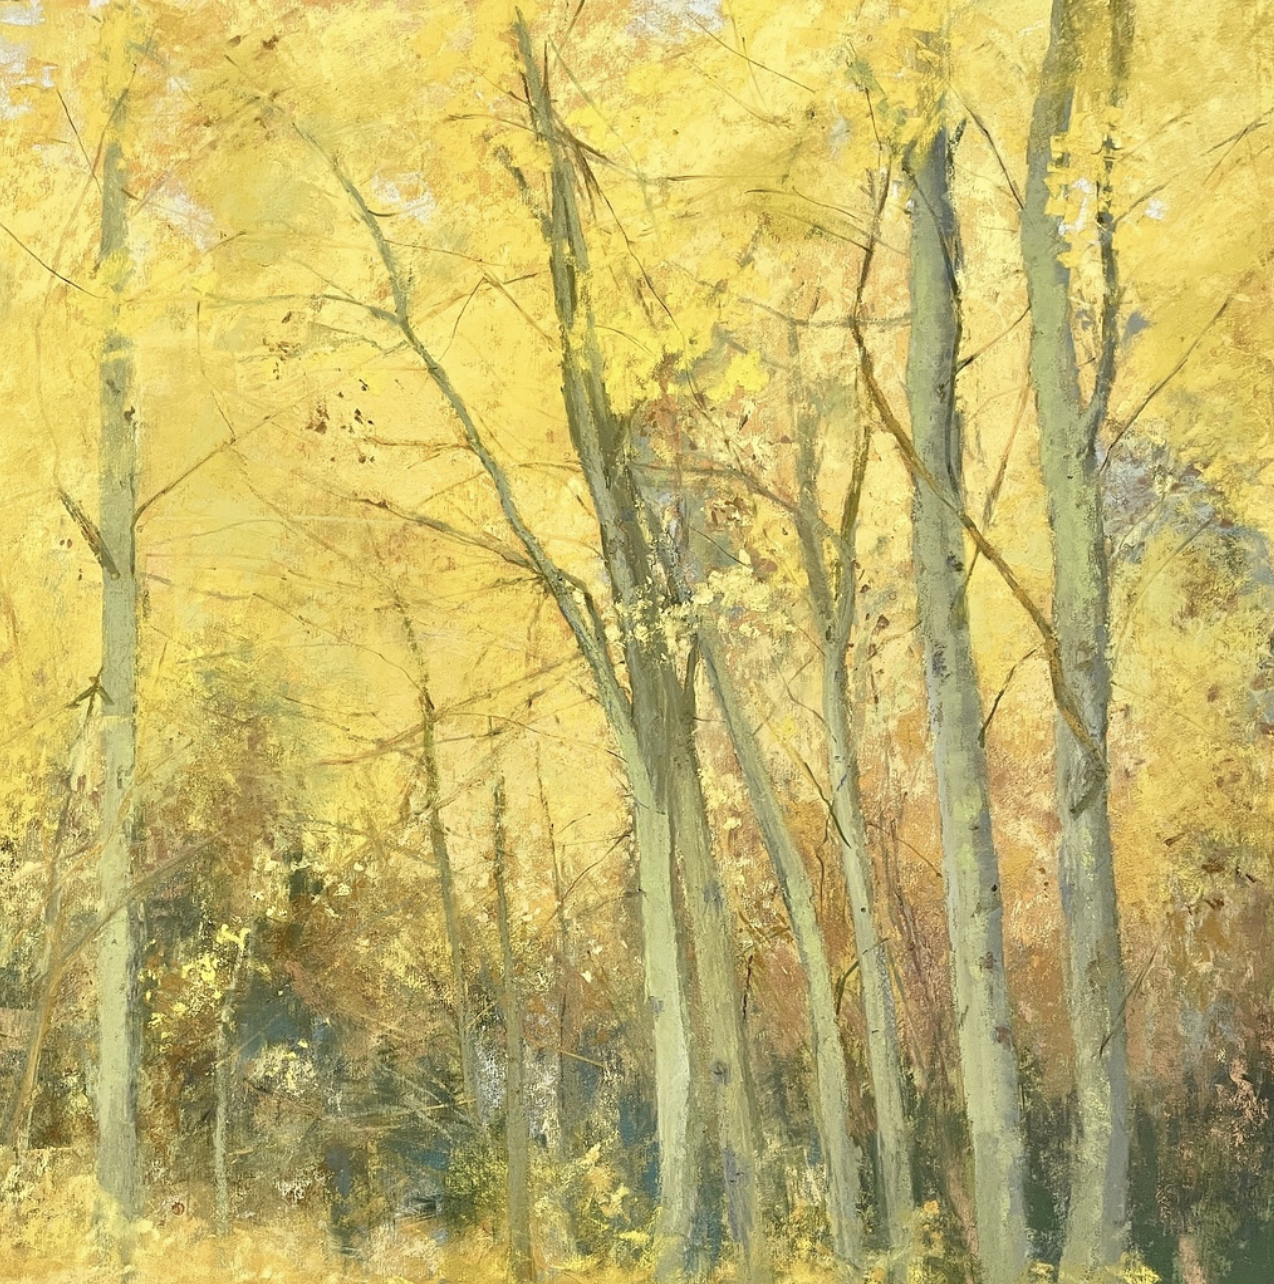 Autumn paintings - Maureen Spinale, "Bliss," pastel on sand paper mounted on Gatorboard, 22 x 22 in.